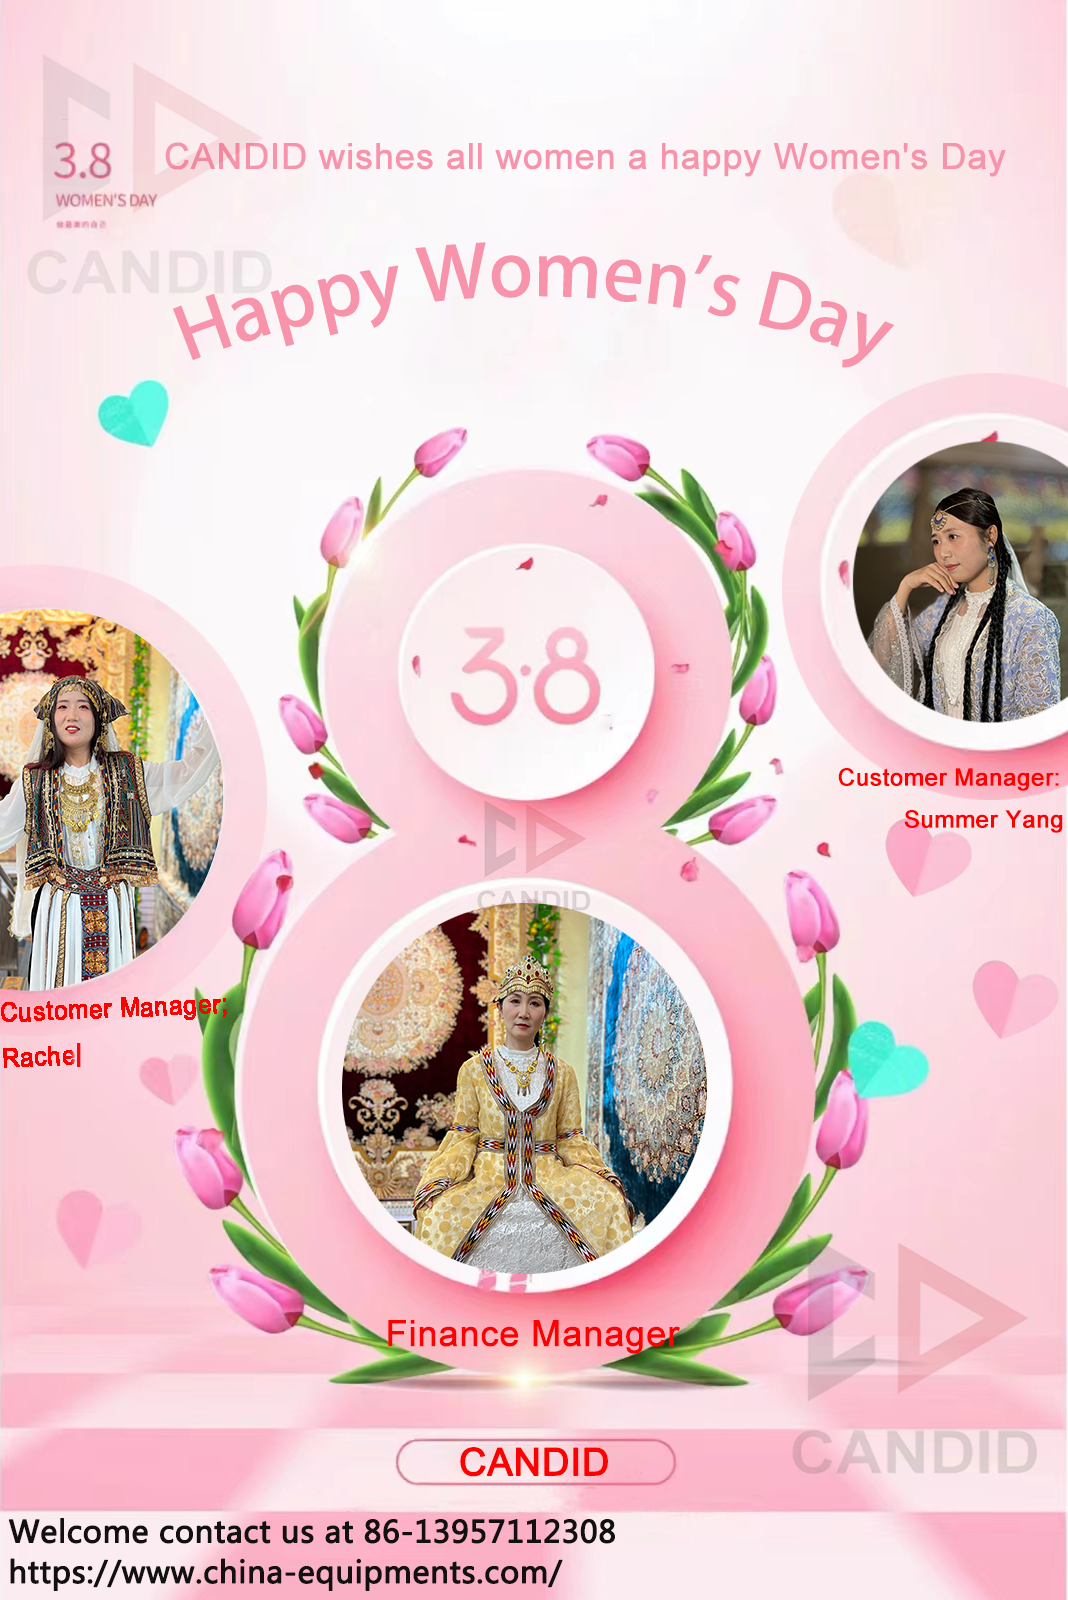 Candid wishes everyone a happy Women's Day